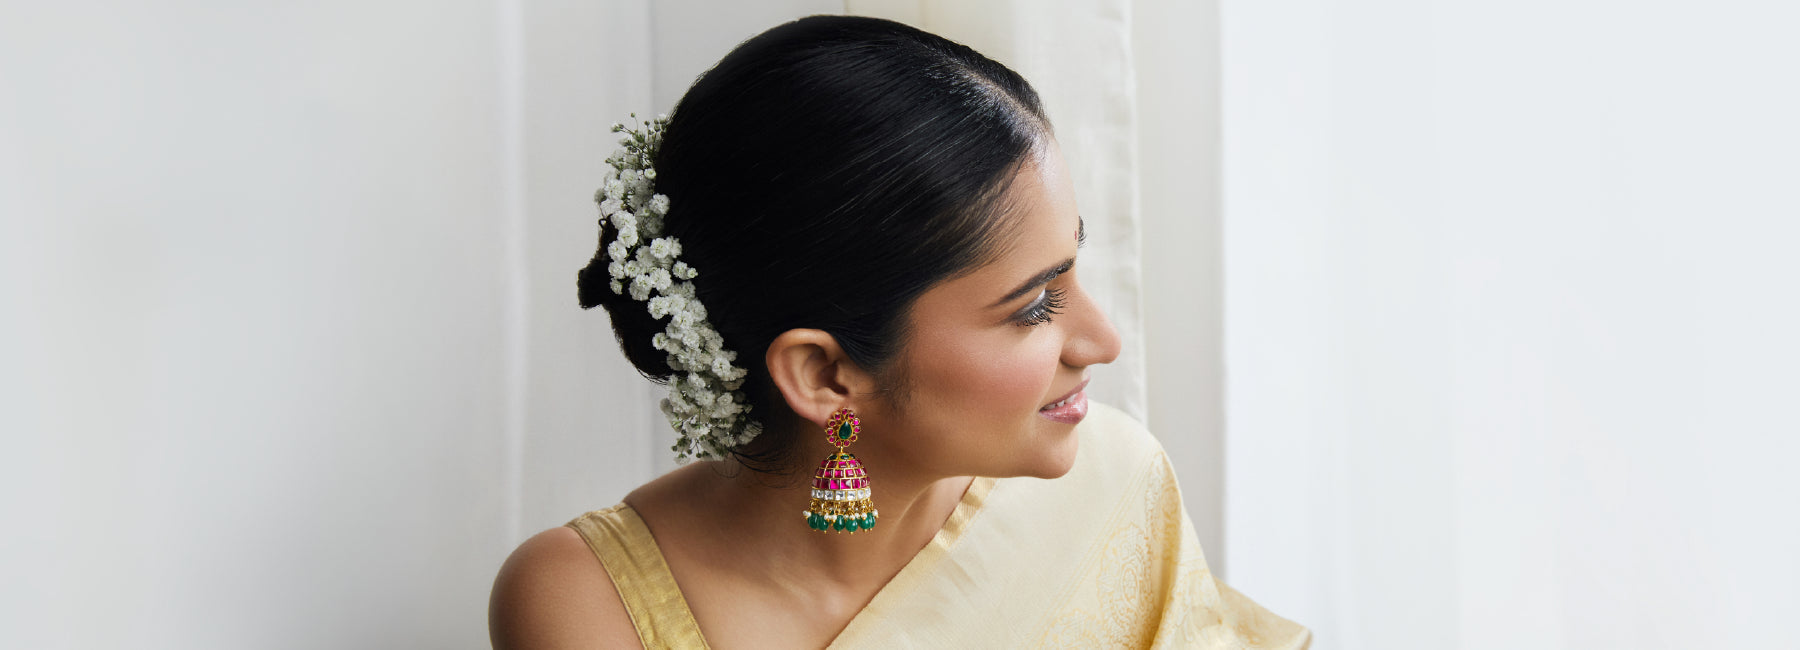 Jhumka Earrings: The Perfect Fashion Essential for Every Occasion